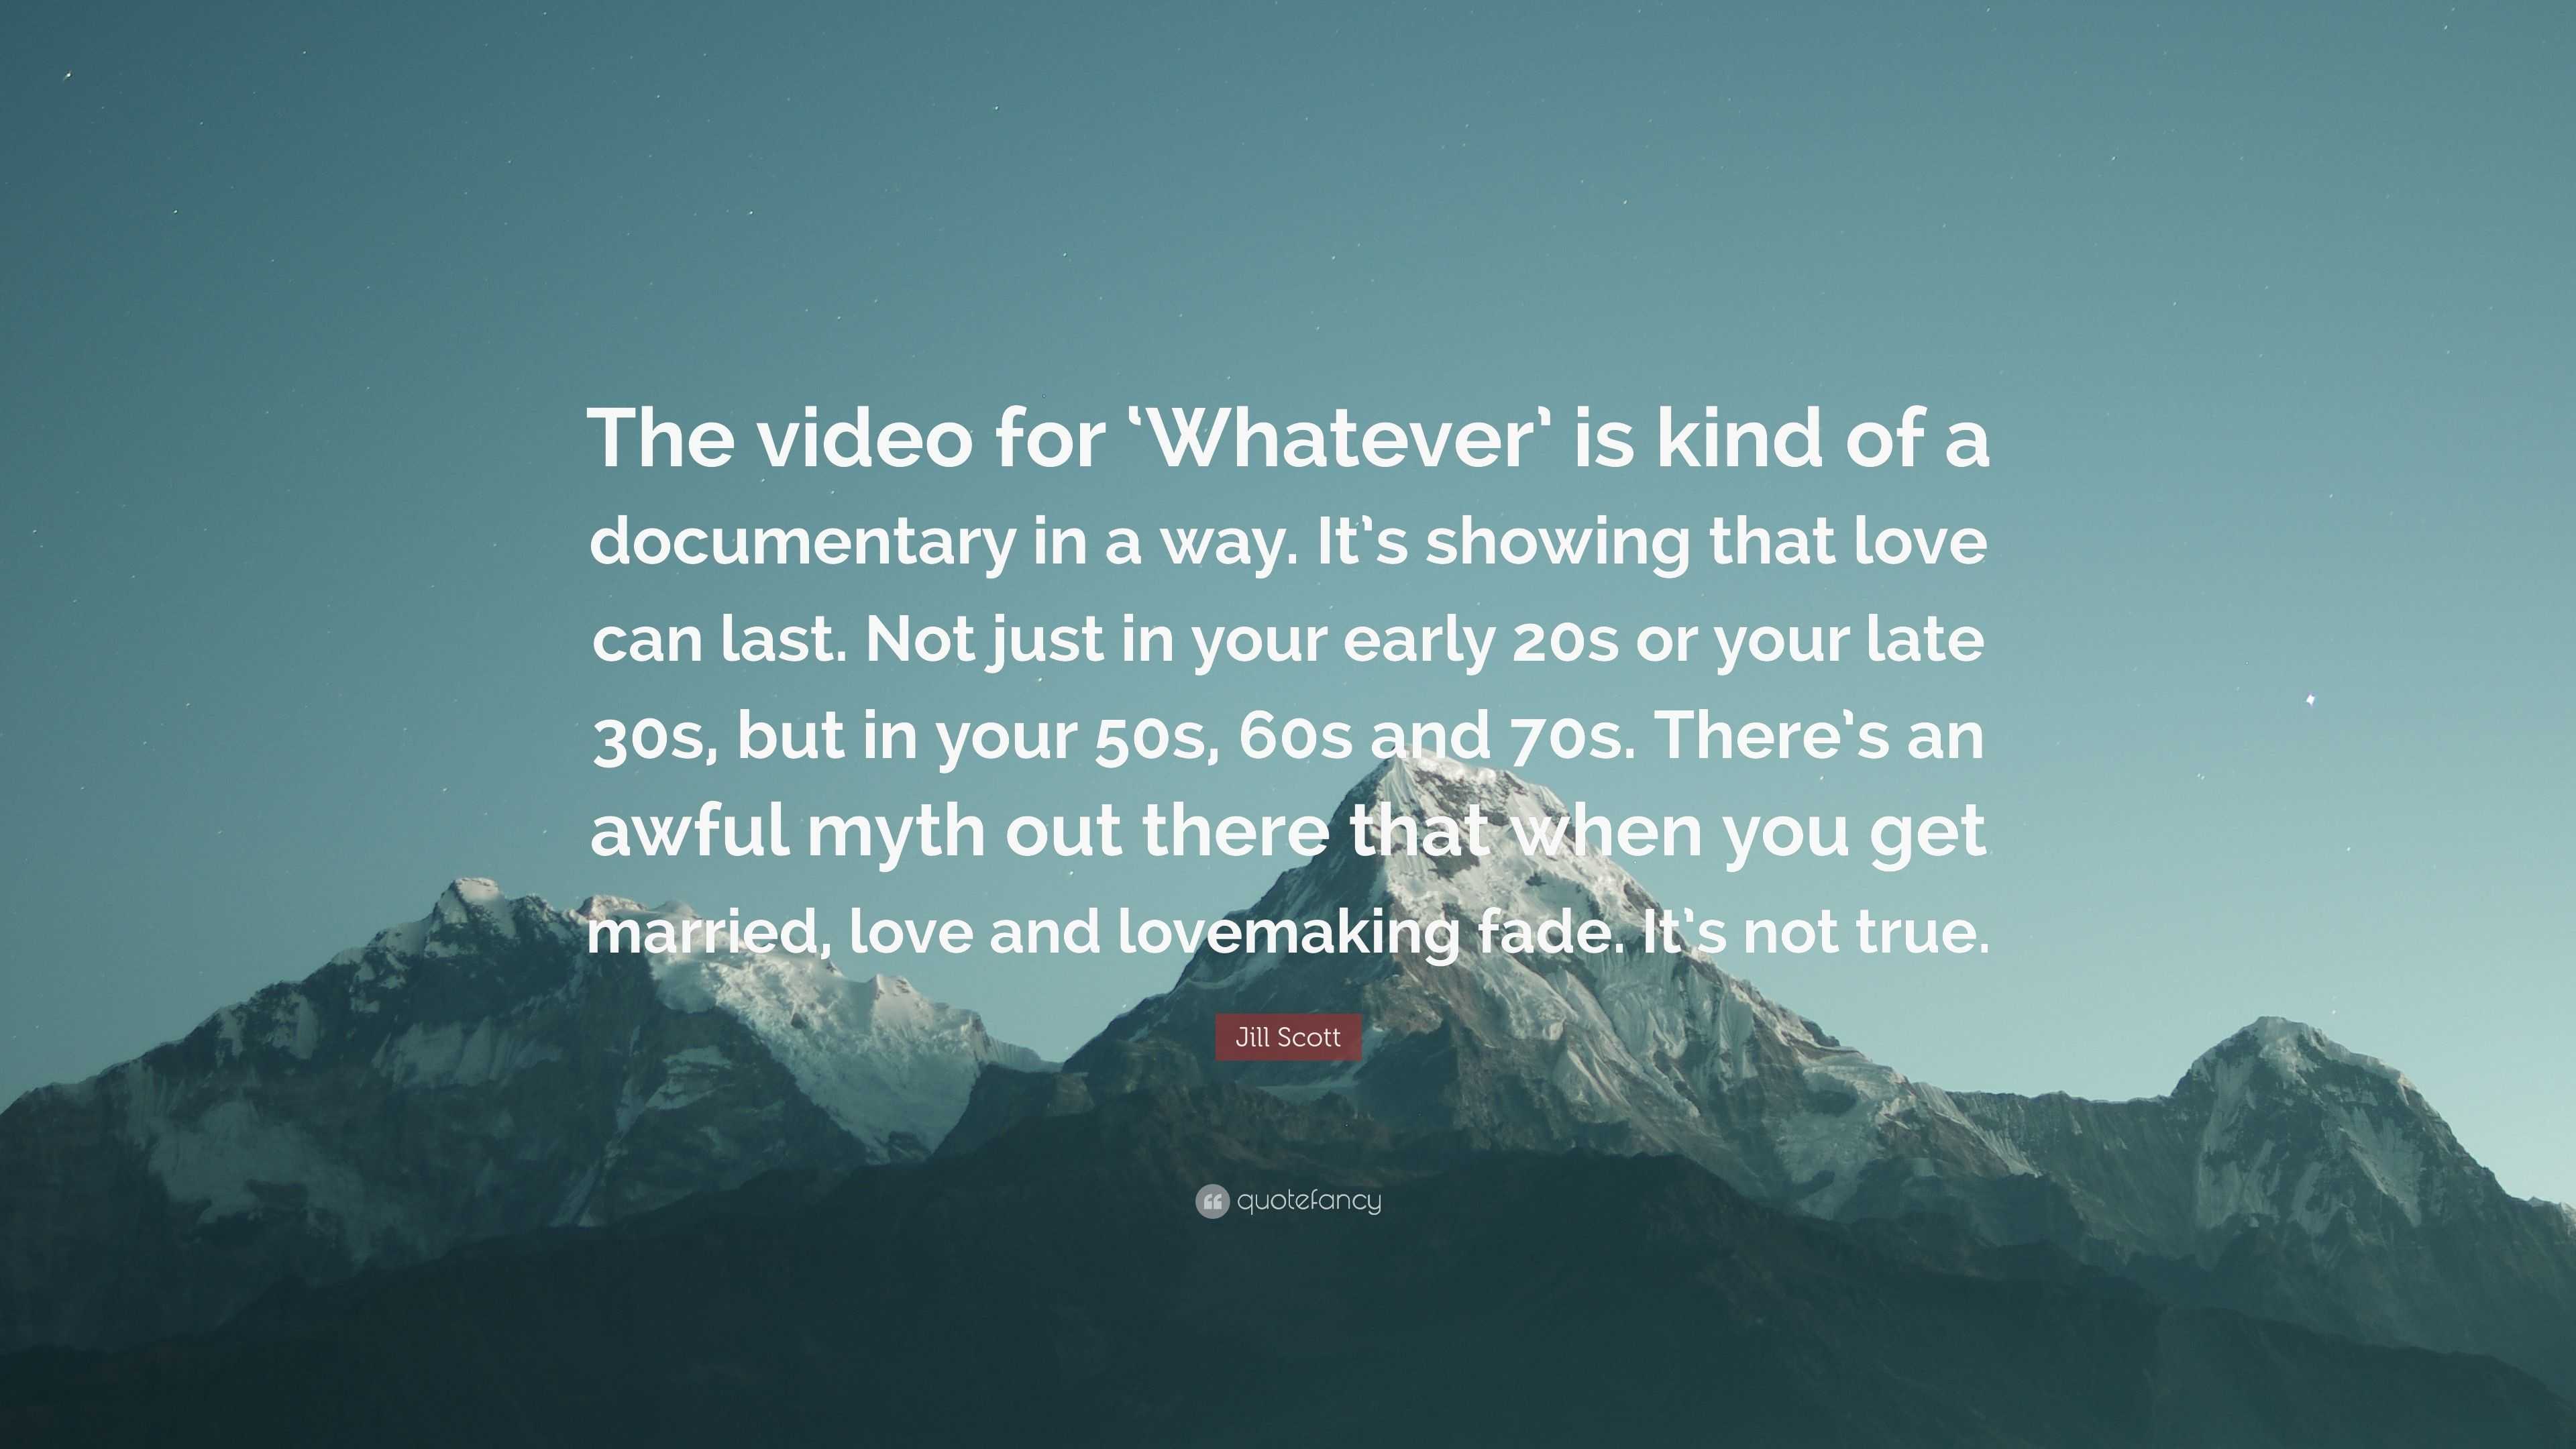 Jill Scott Quote “The video for Whatever is kind of a documentary